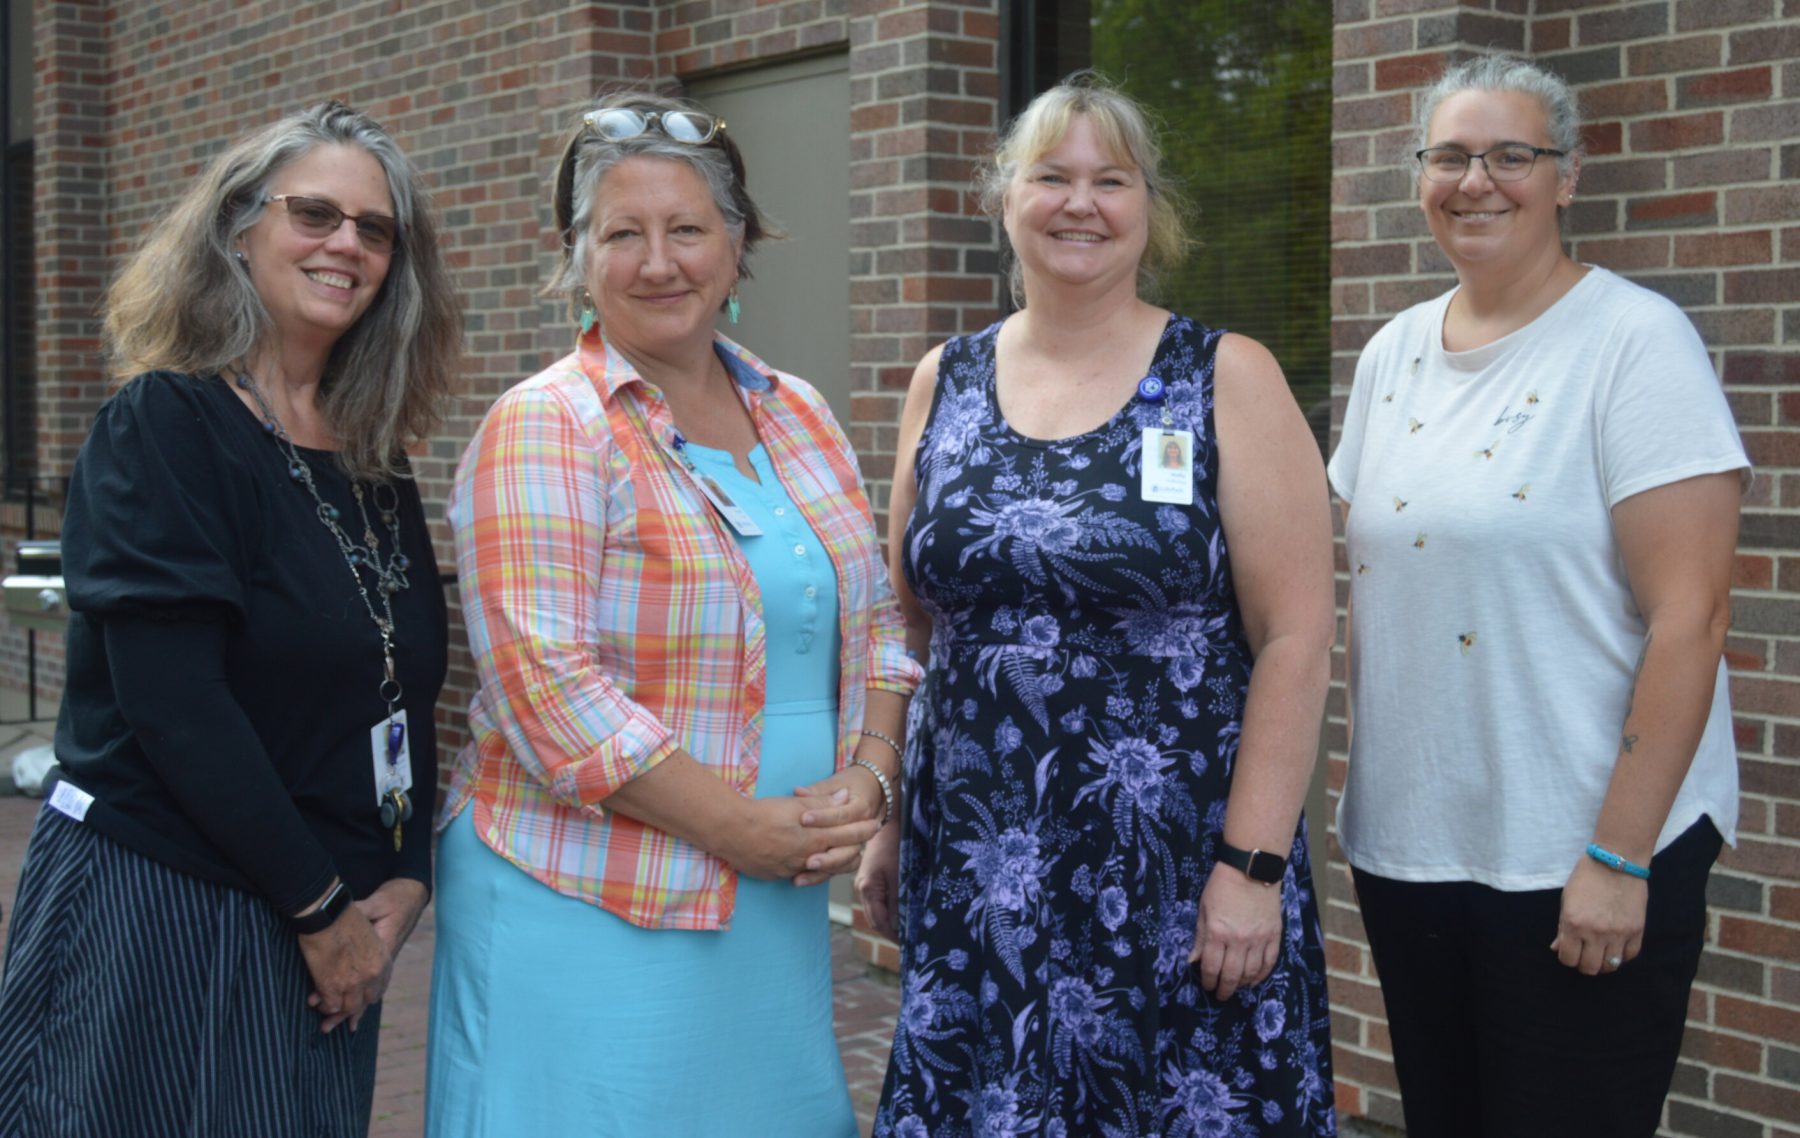 (Left to right) Diane Robie, Carol Foote, Holly Holloway, and Danielle Boyd standing outside in front of our brick office.